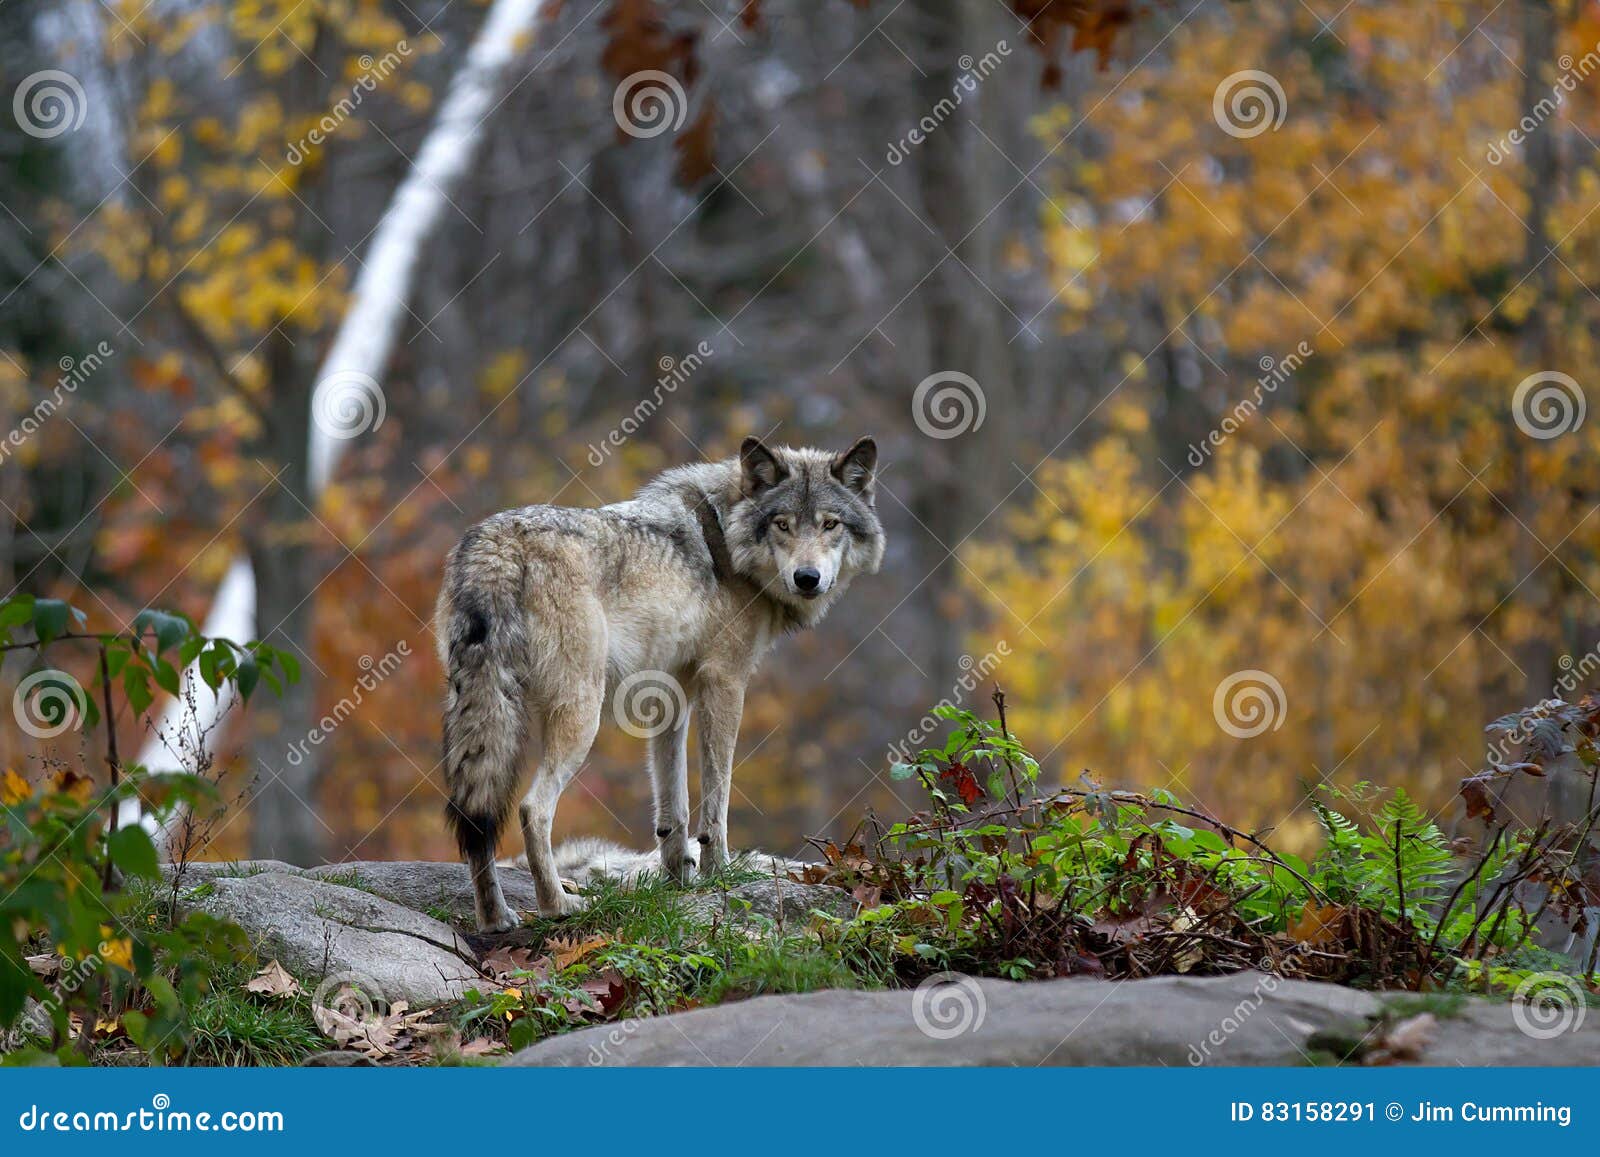 timber wolf (canis lupus) standing on a rocky cliff in autumn in canada